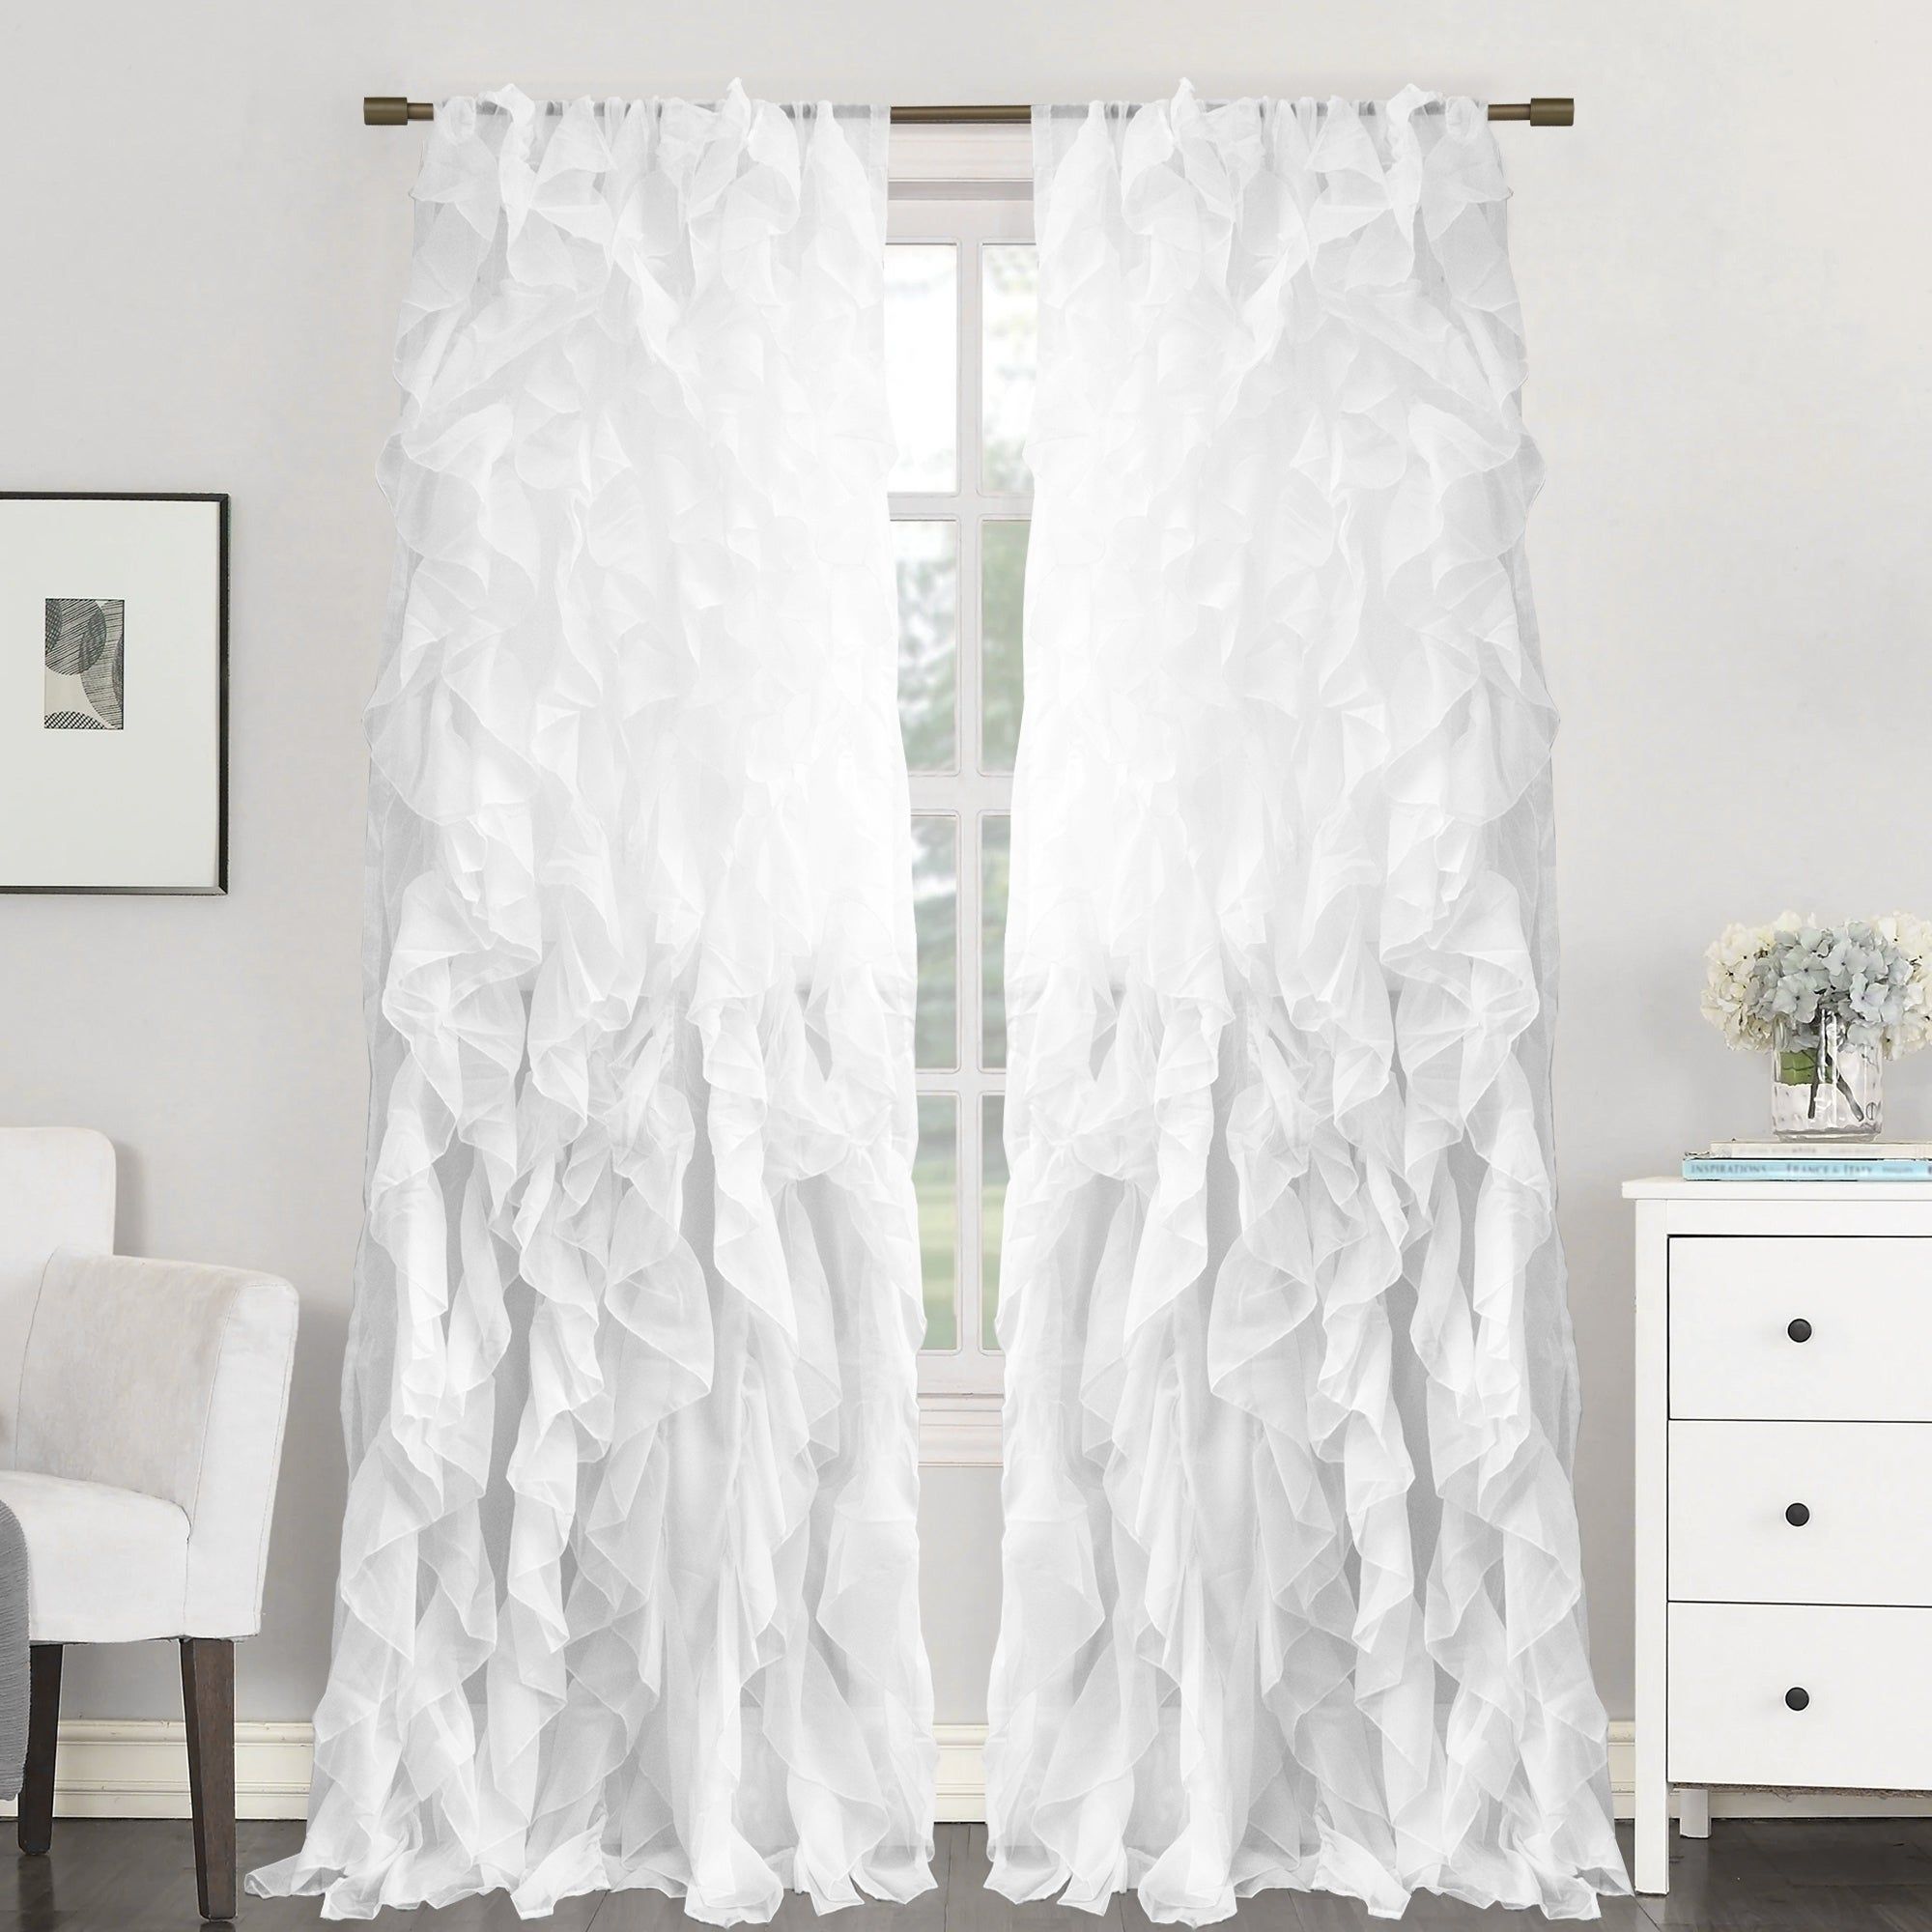 Sweet Home Collection Sheer Voile Waterfall Ruffled Tier 84 Inch Single  Curtain Panel – 84" Long X 50" Wide With Regard To Sheer Voile Ruffled Tier Window Curtain Panels (View 4 of 20)